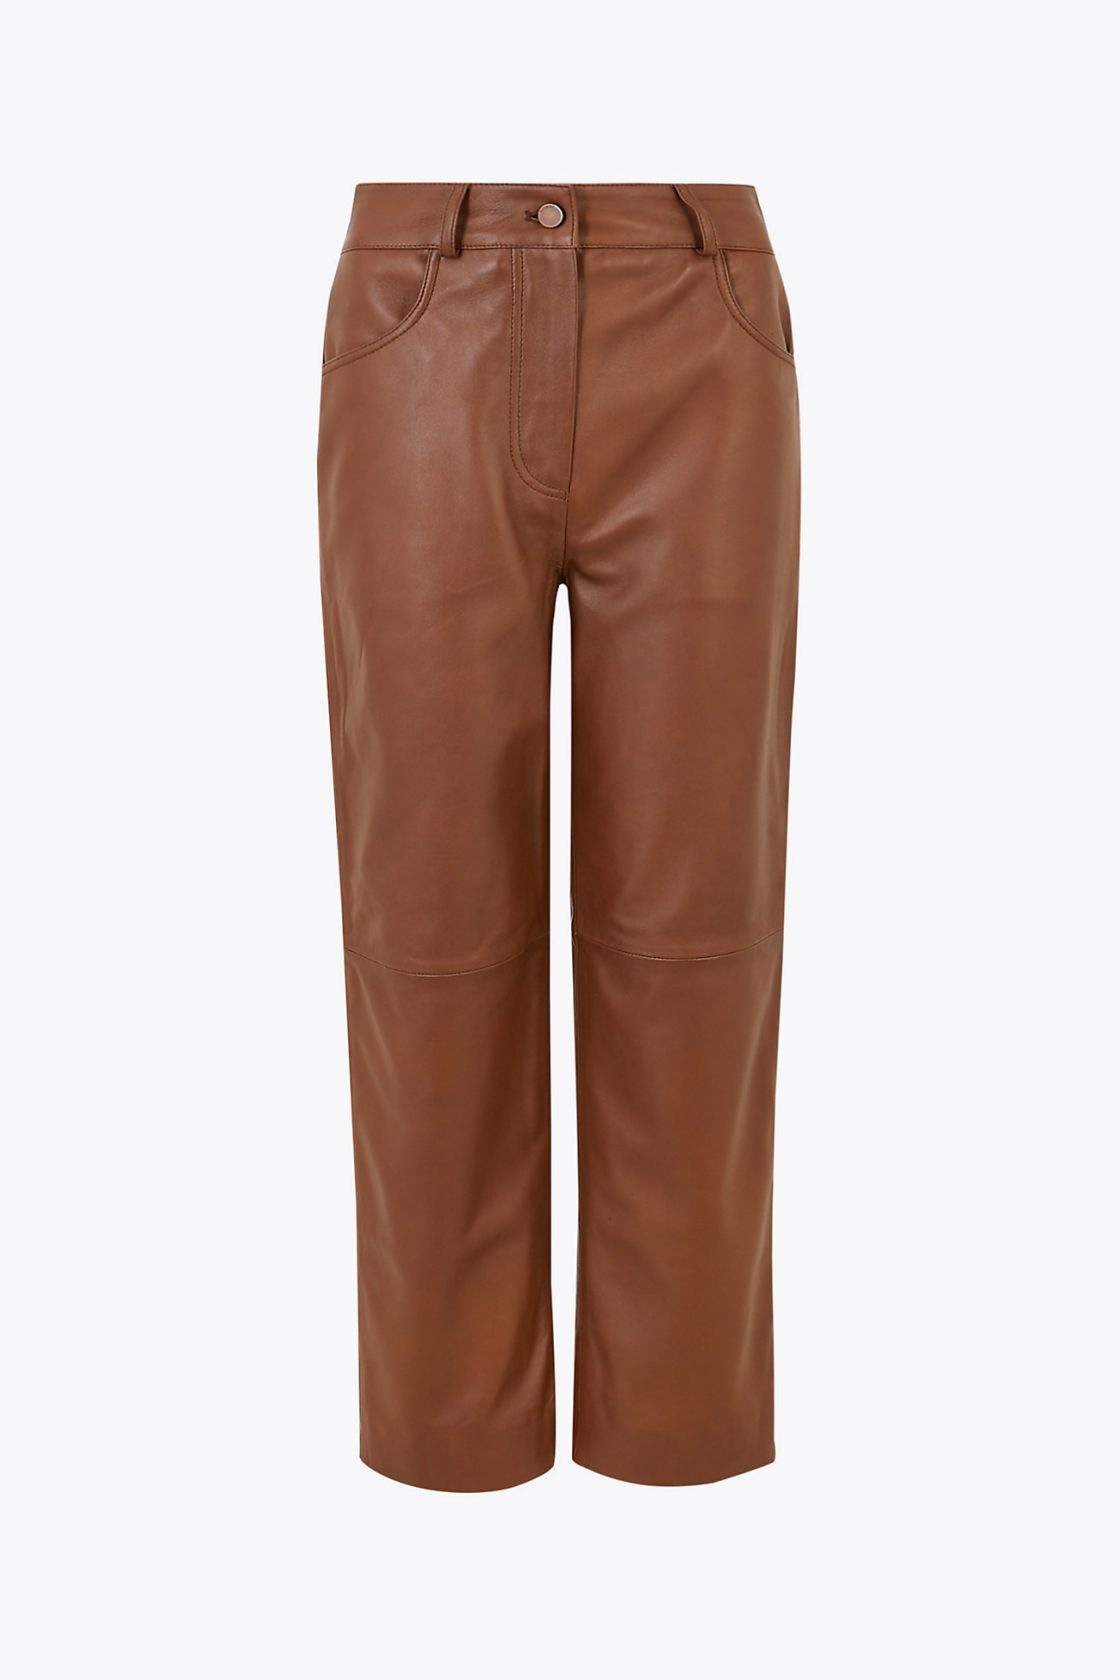 THE BEST IN FAUX LEATHER TROUSERS - AFFORDABLE HIGH STREET HAUL